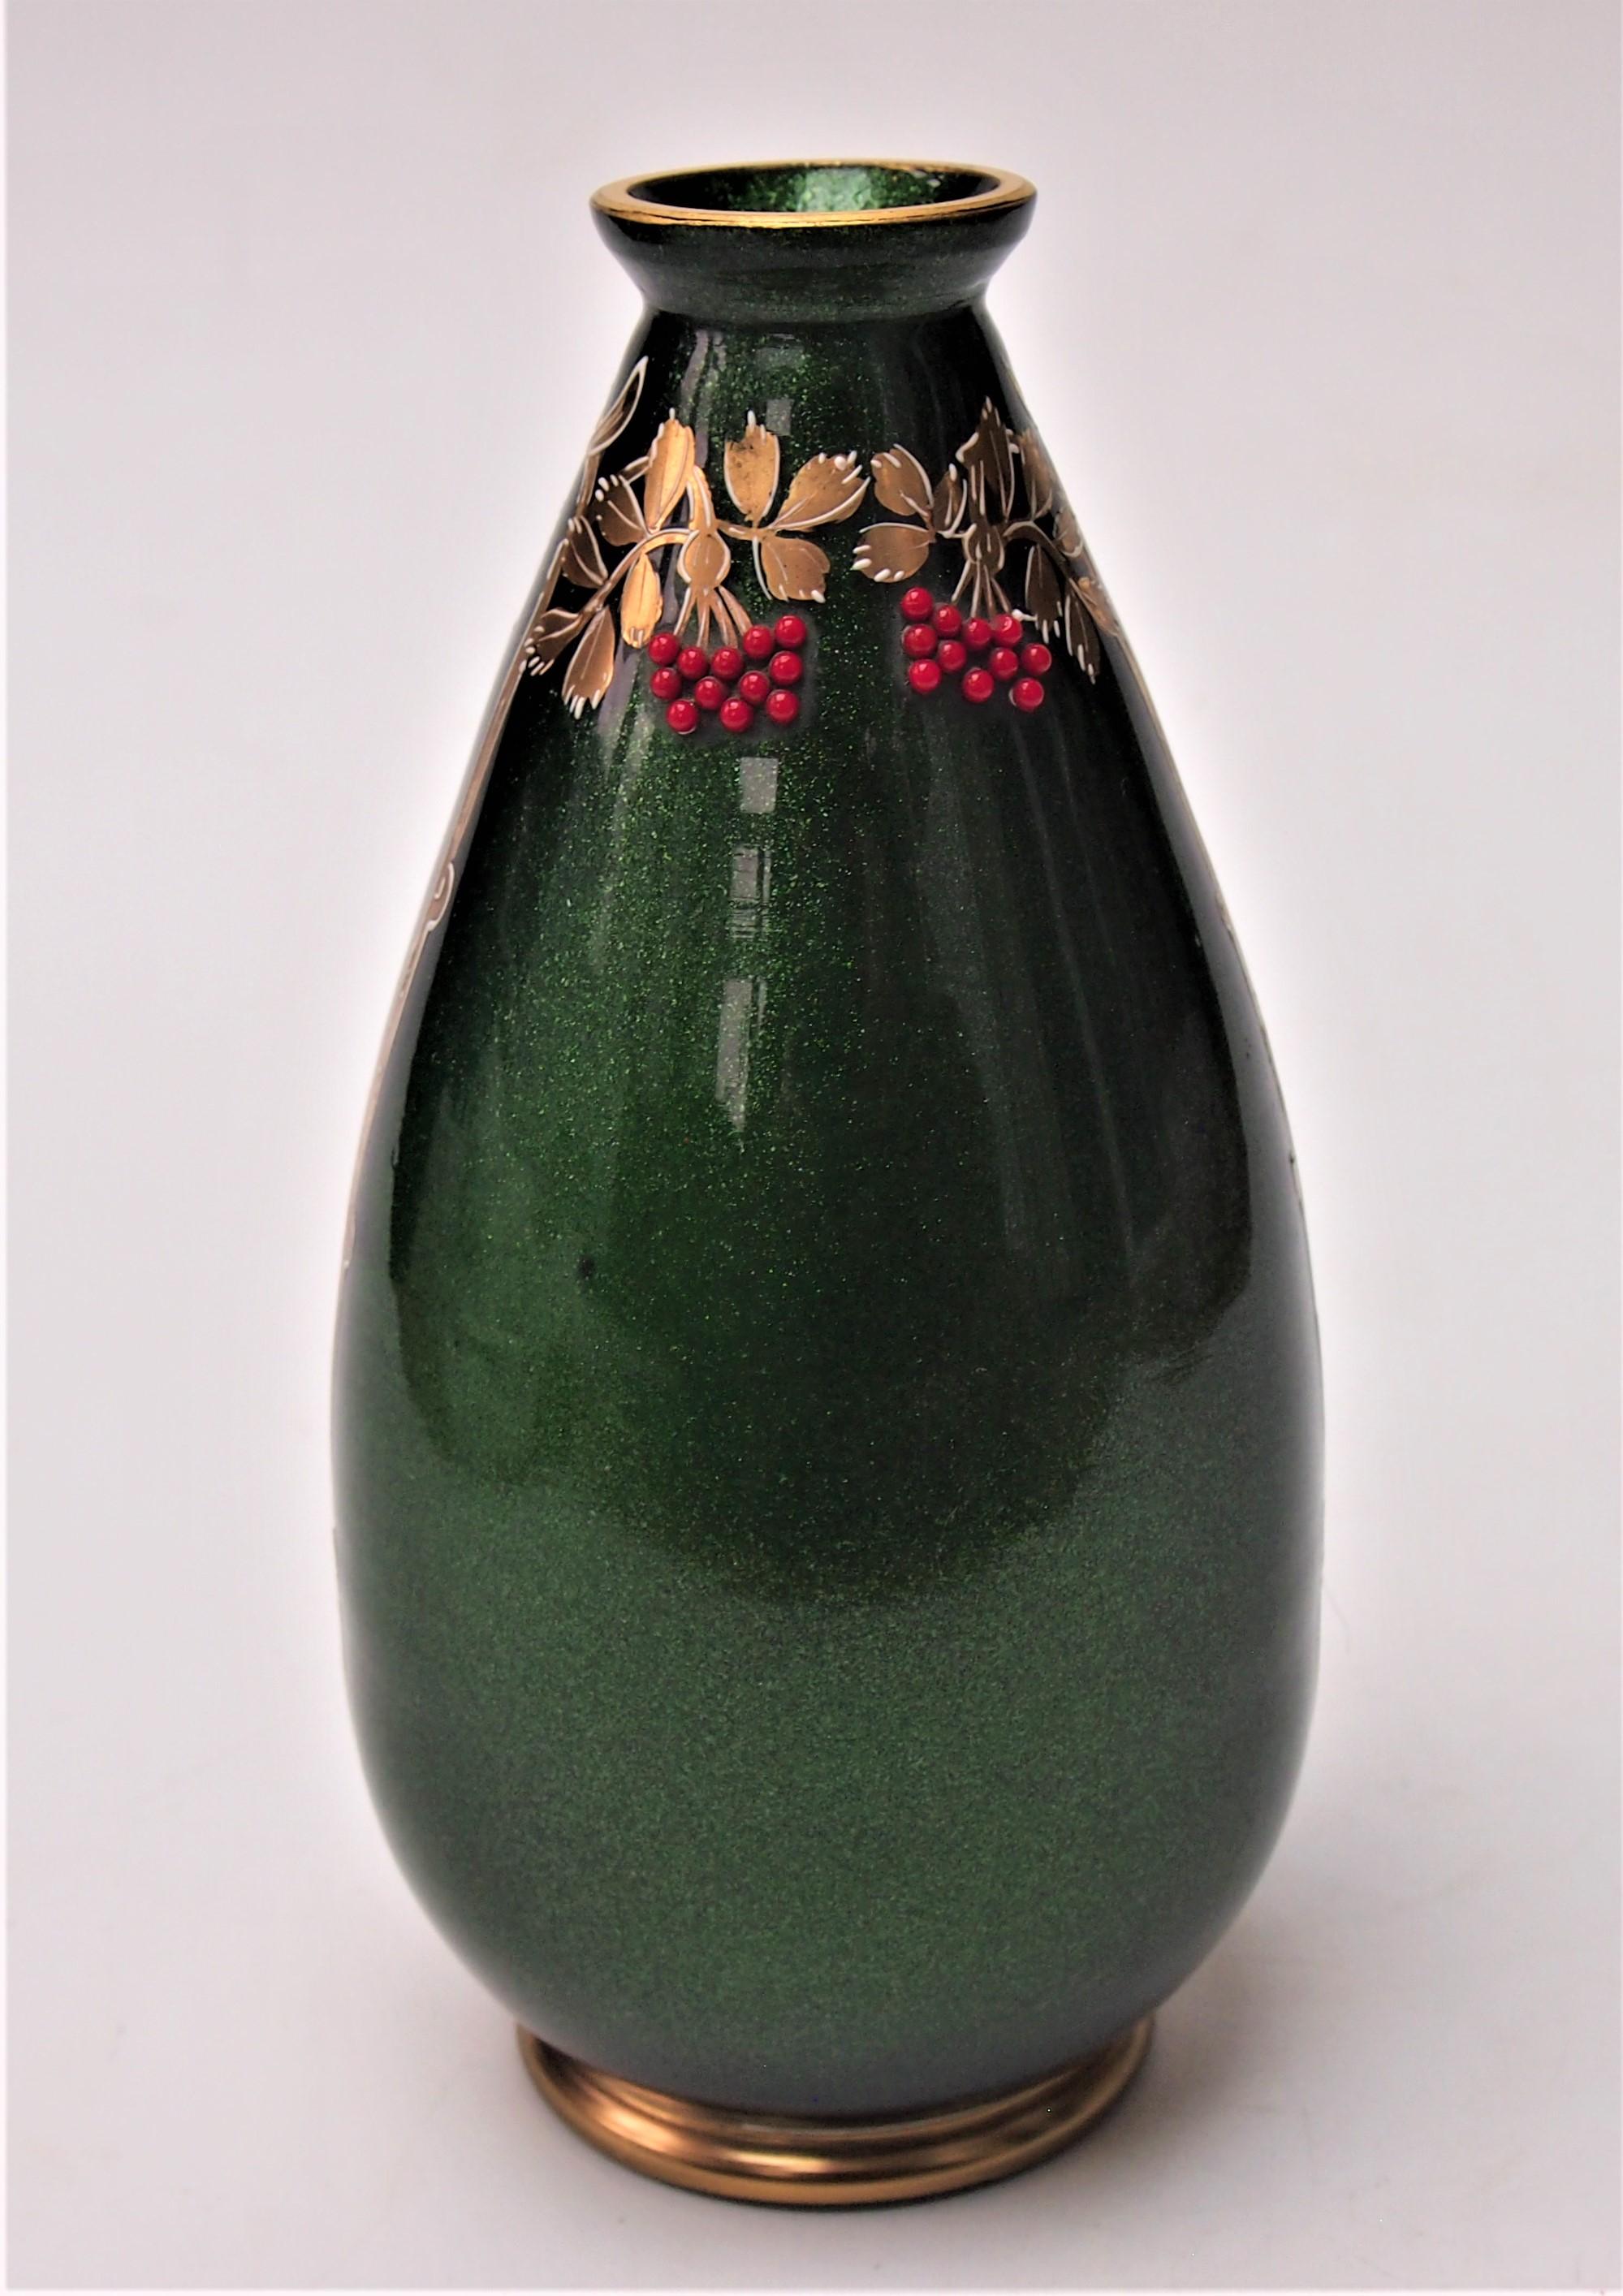 Vienna Secession Josephine gilded and enamelled red beaded green aventurine glass vase -German